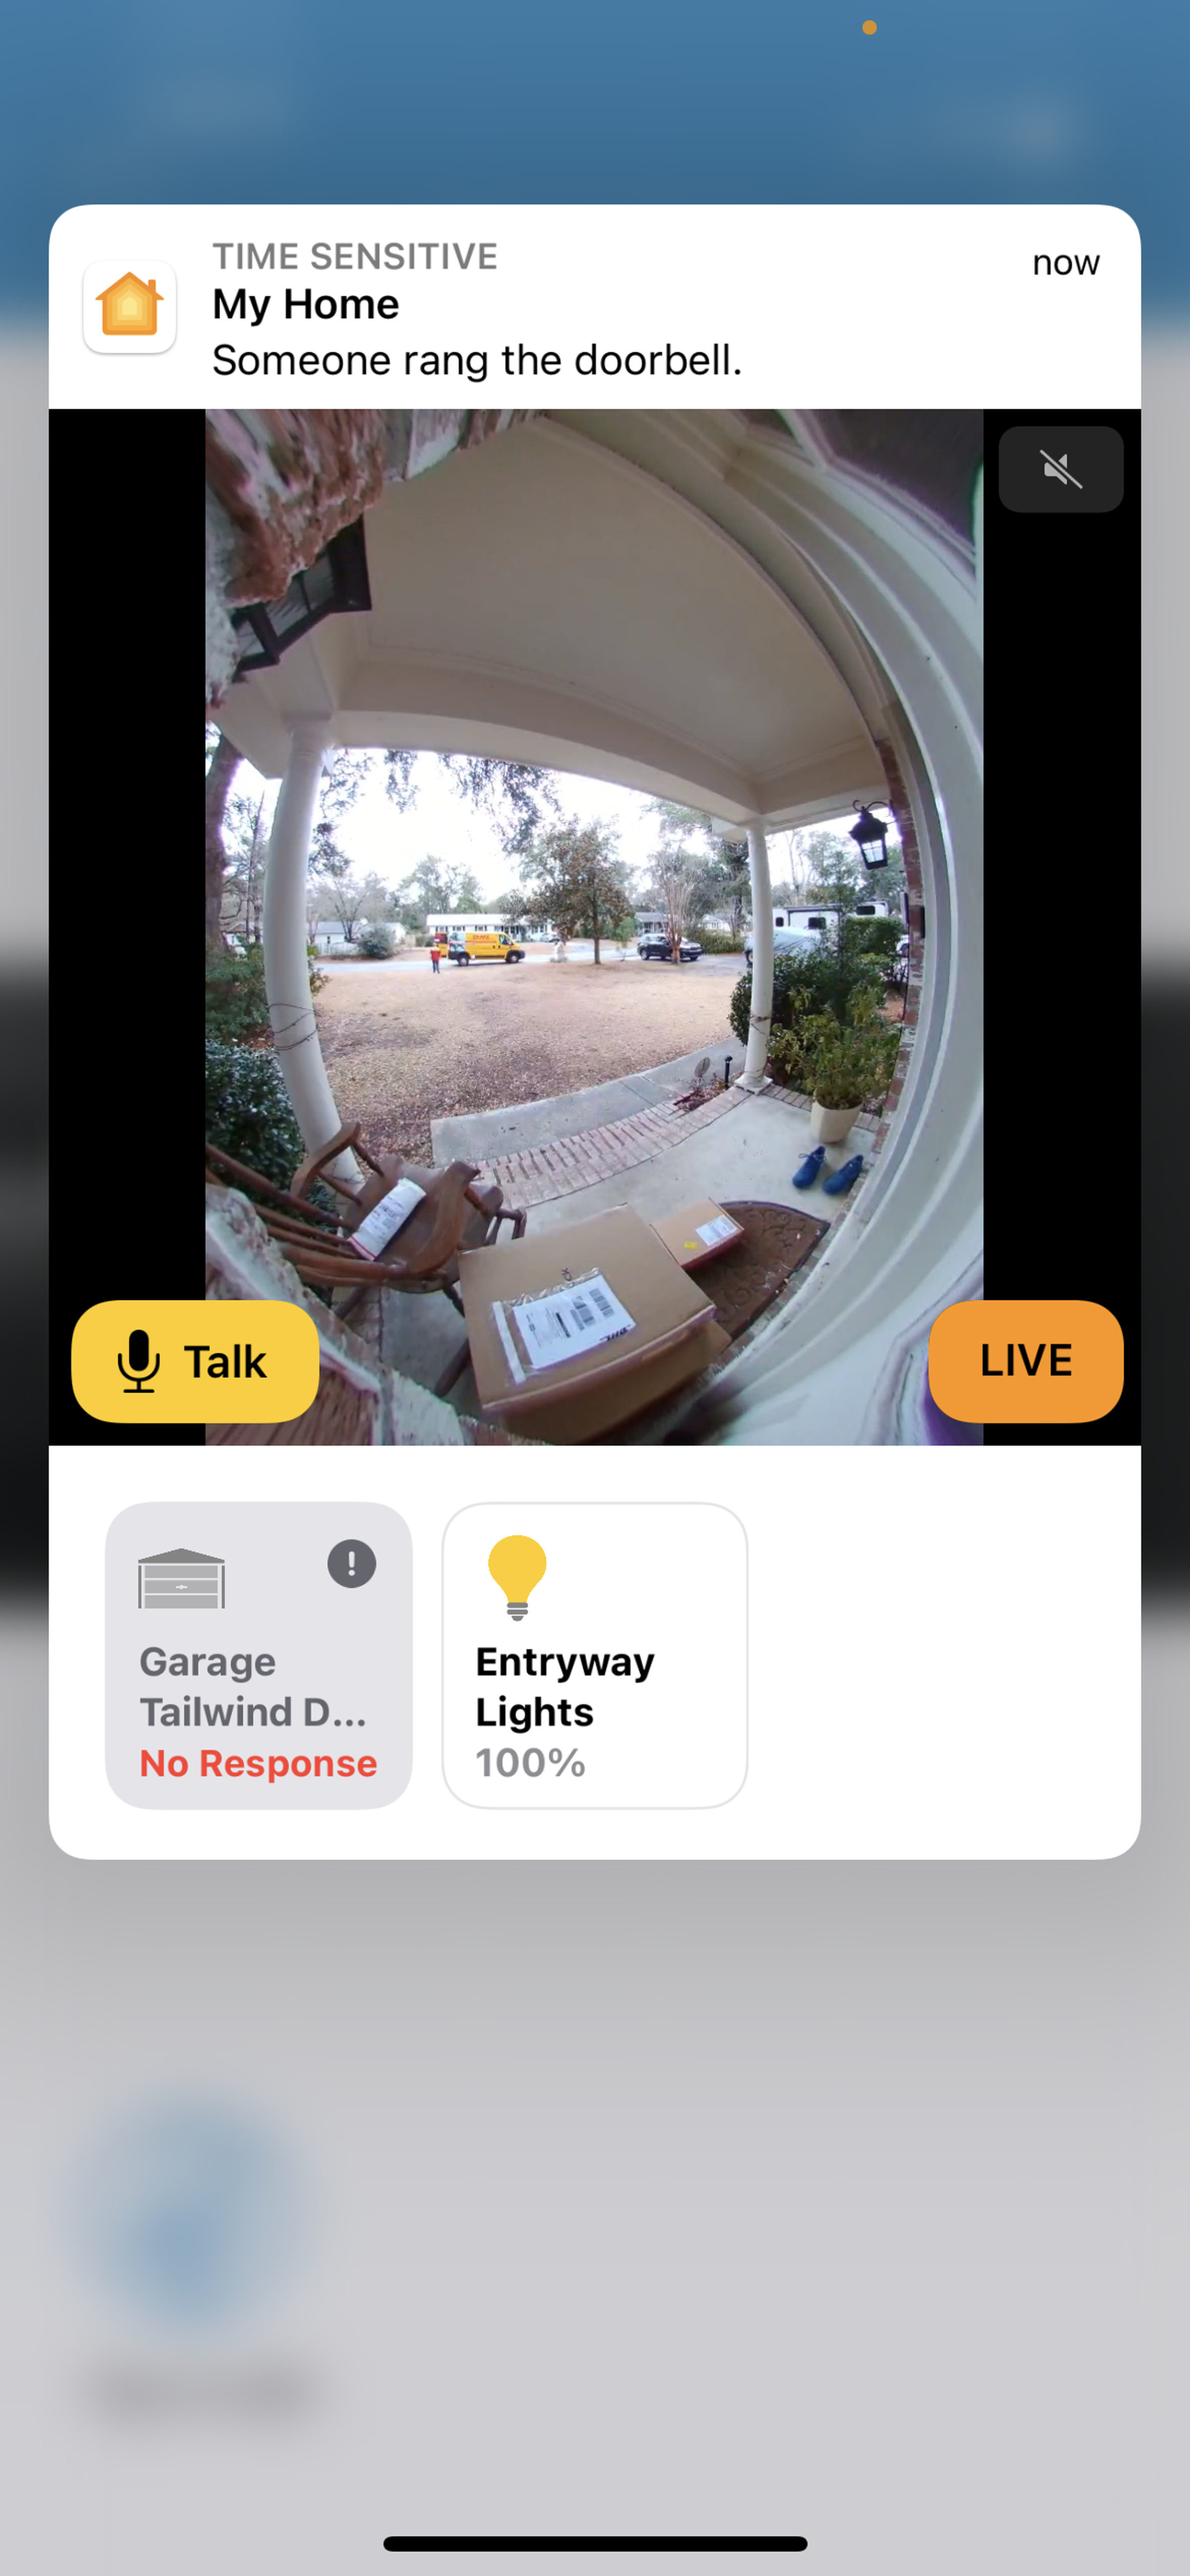 With rich notifications in HomeKit, you can talk to a visitor from your lock screen.